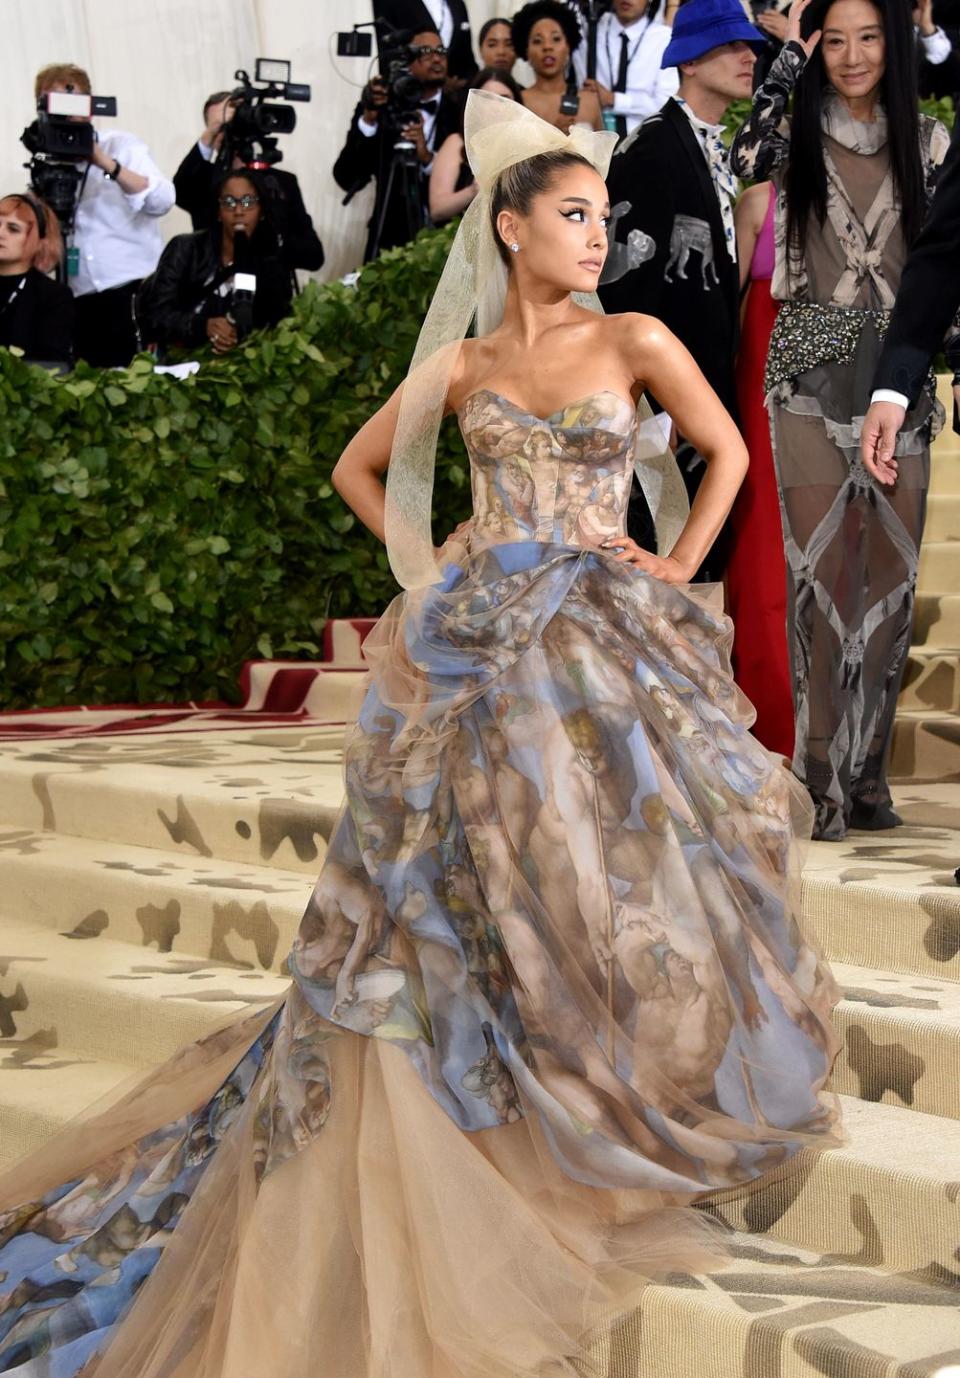 new york, ny may 07 ariana grande attends the heavenly bodies fashion the catholic imagination costume institute gala at the metropolitan museum of art on may 7, 2018 in new york city photo by john shearergetty images for the hollywood reporter